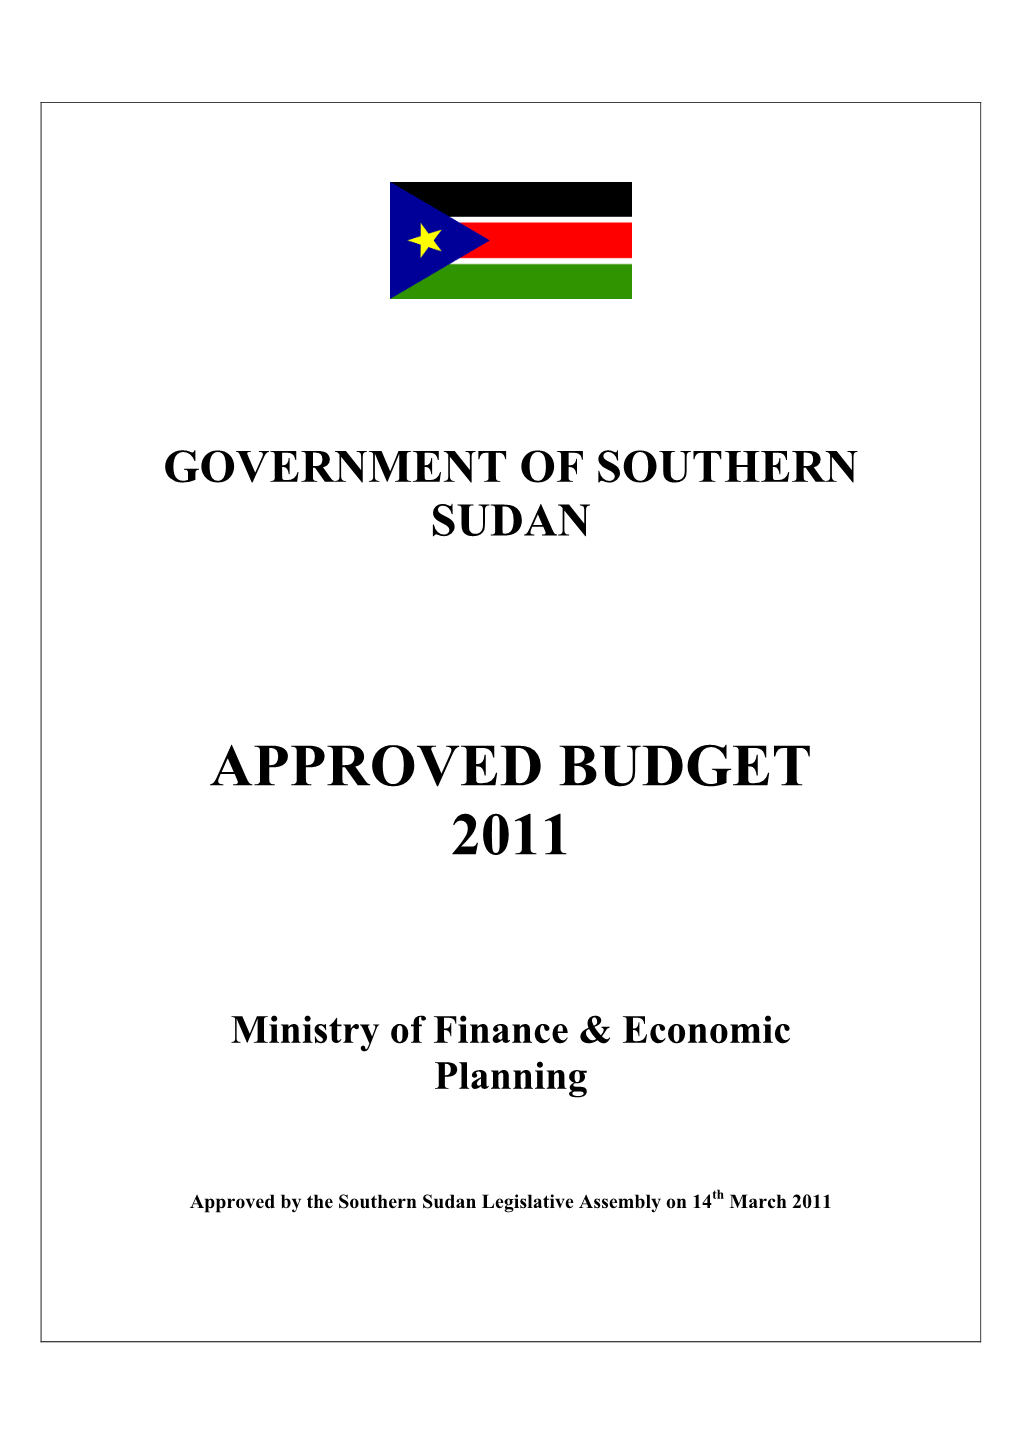 Approved Budget 2011